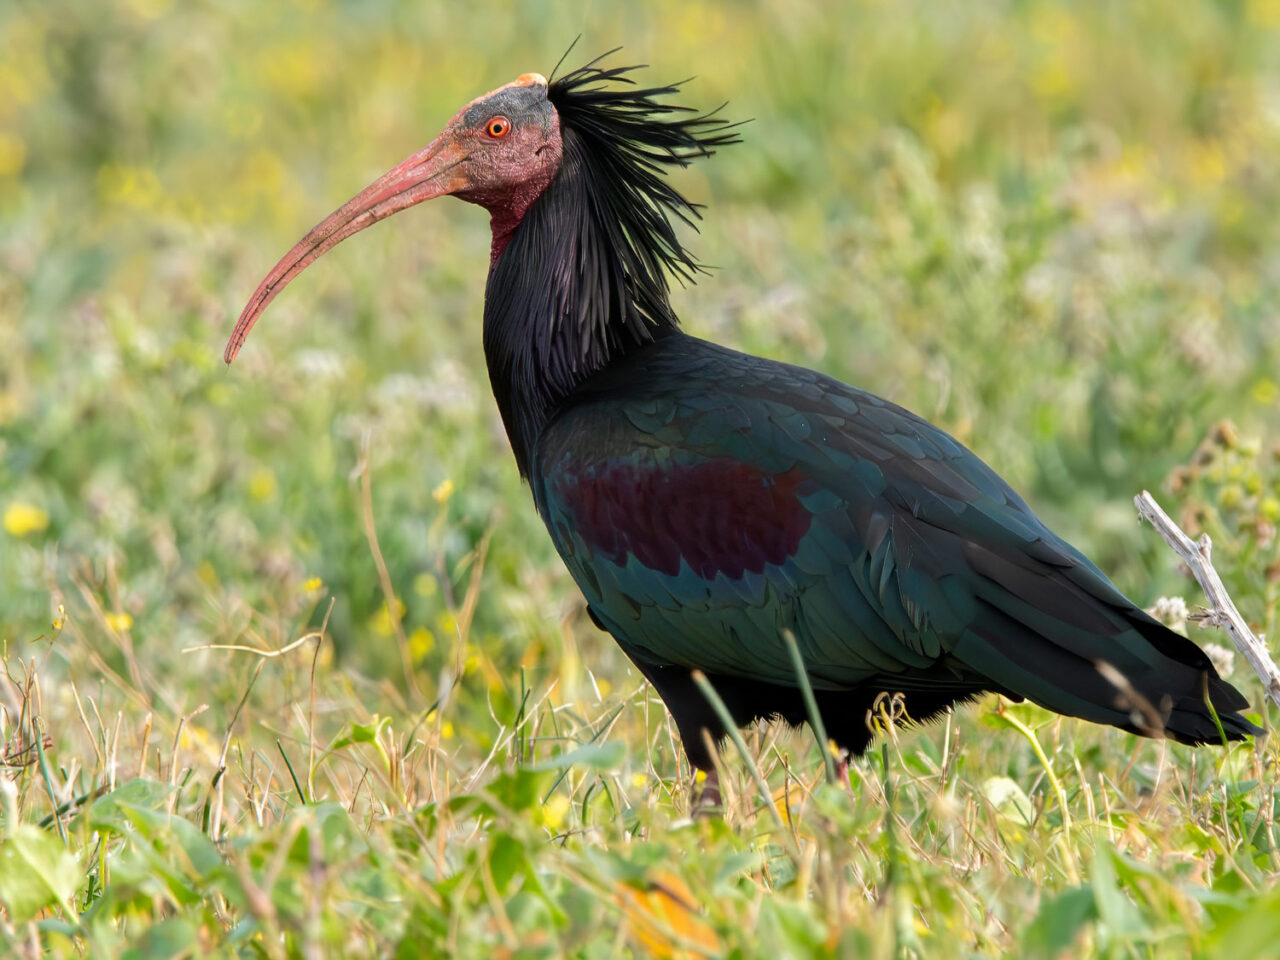 A black bird with a bald head and long, curved pink bill stands in a meadow.